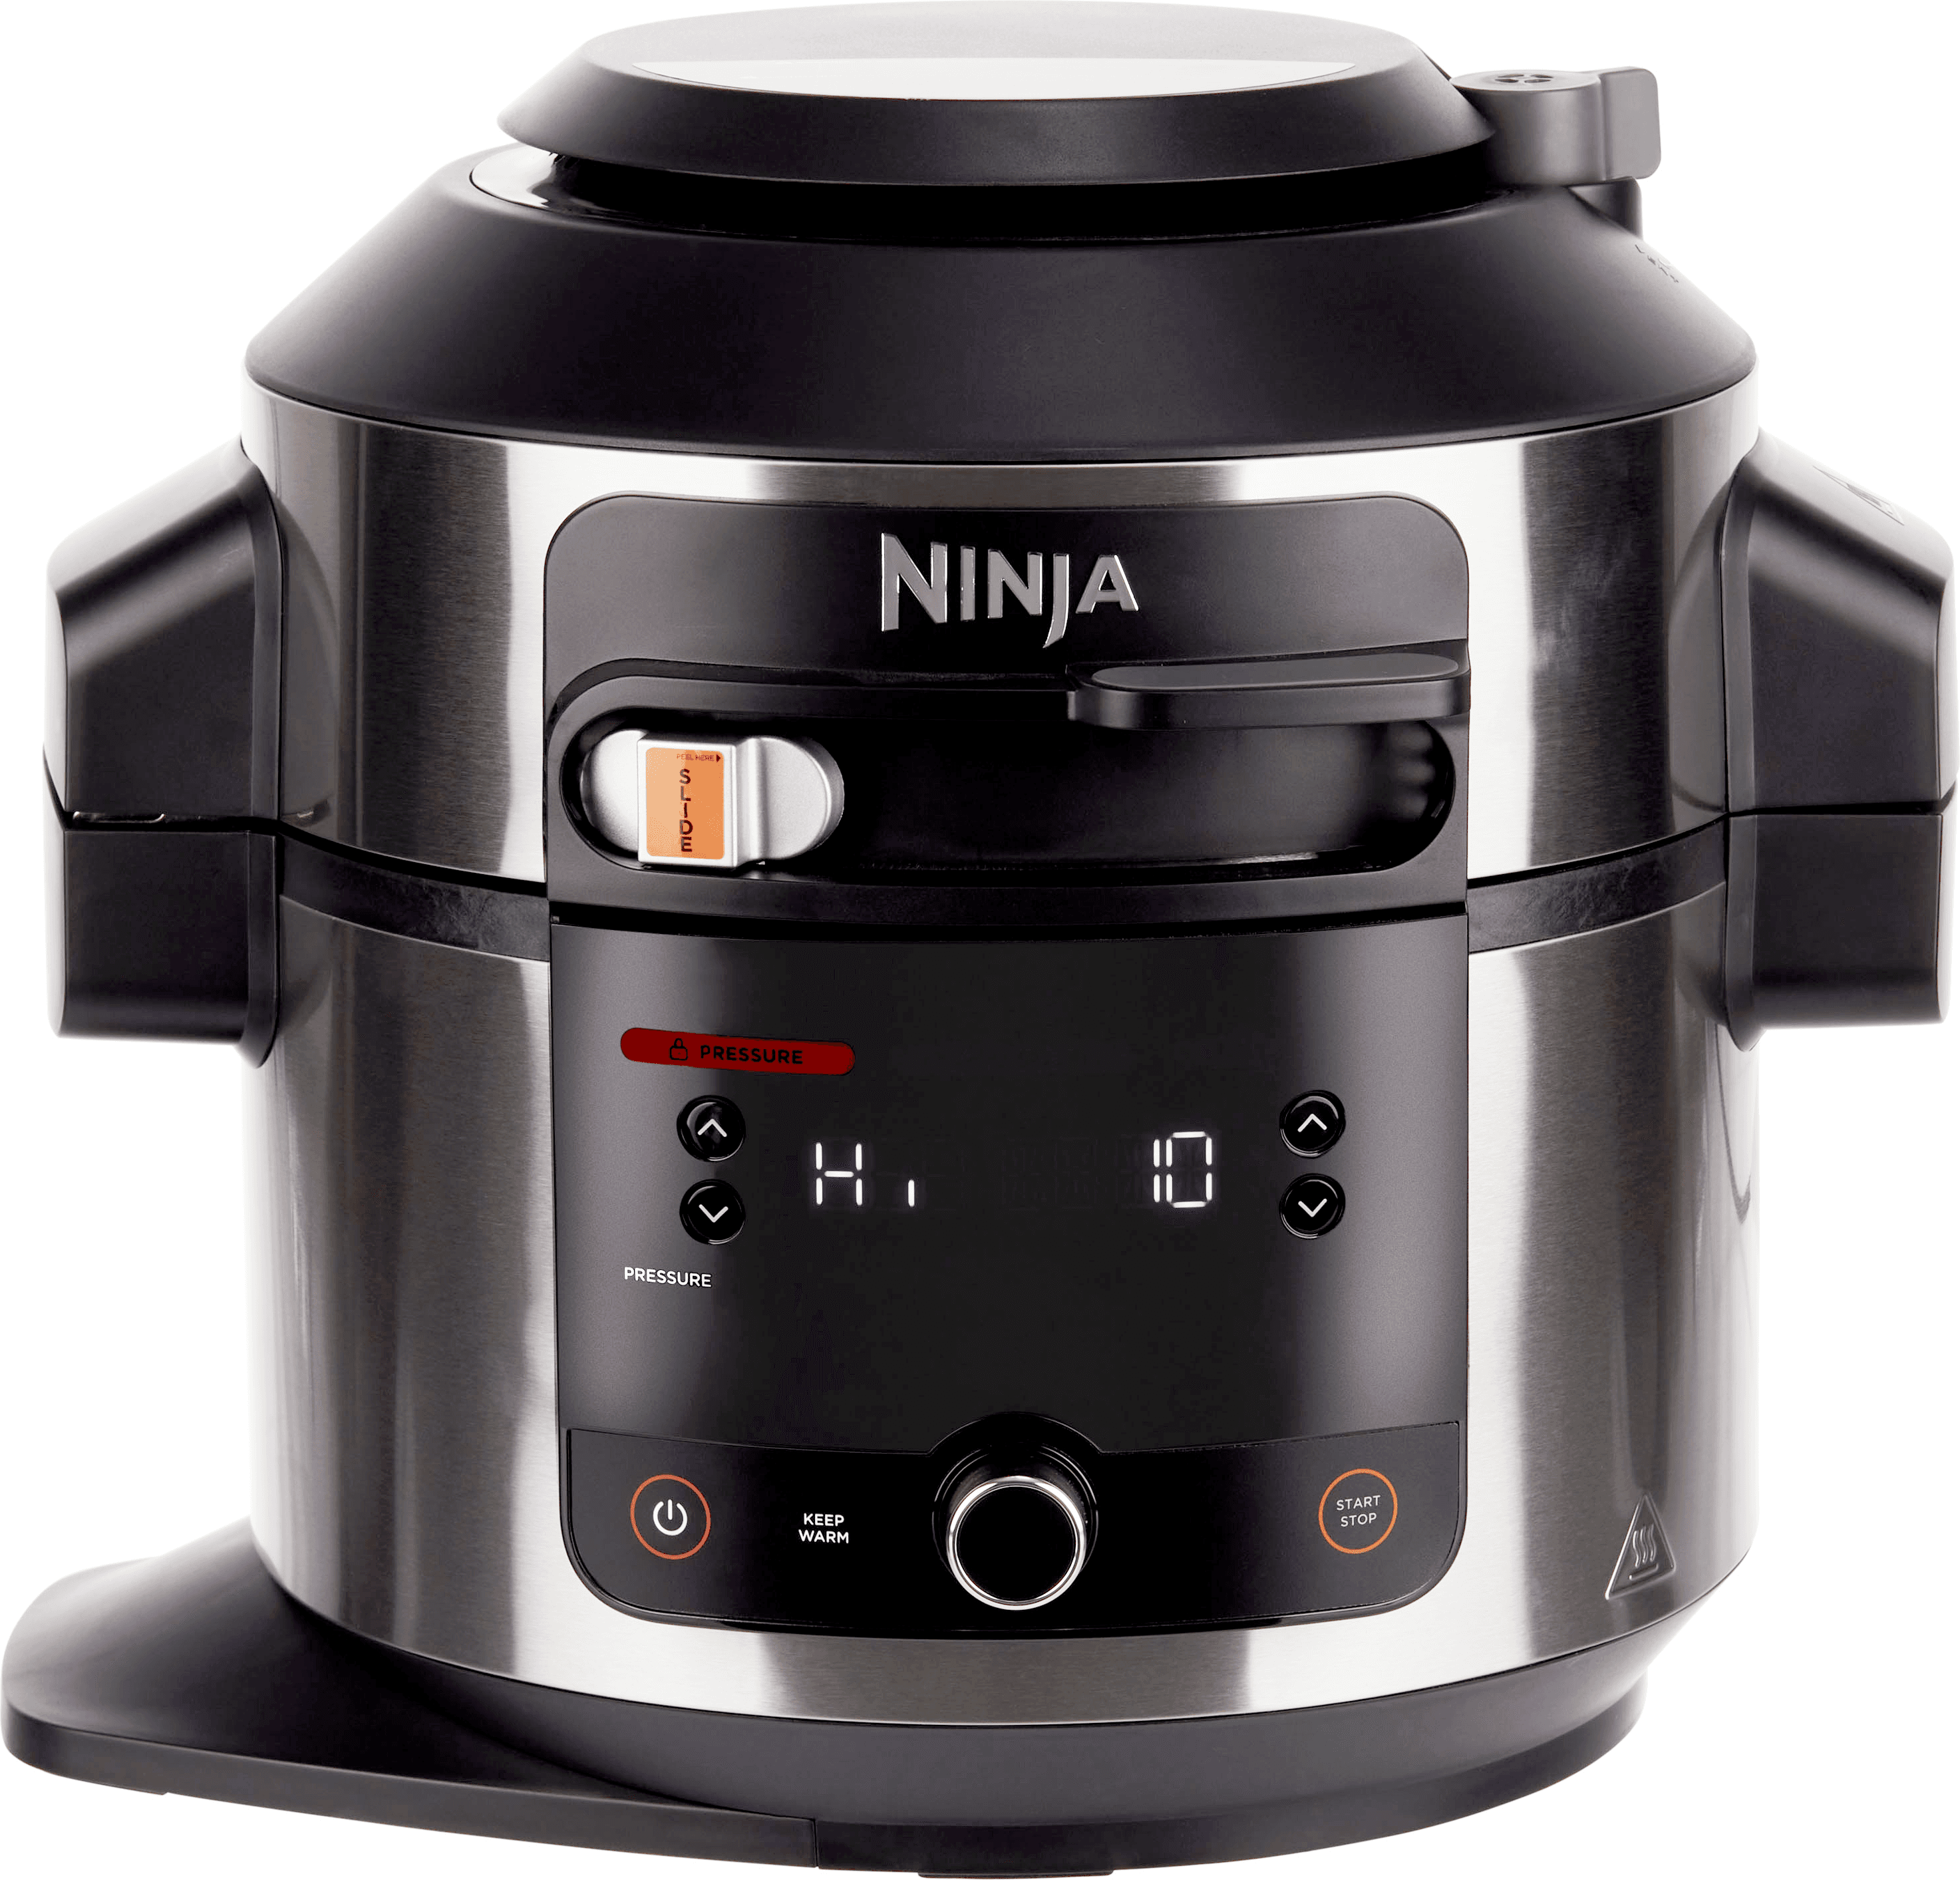 AG551UK, Ninja Grill and Air Fryer